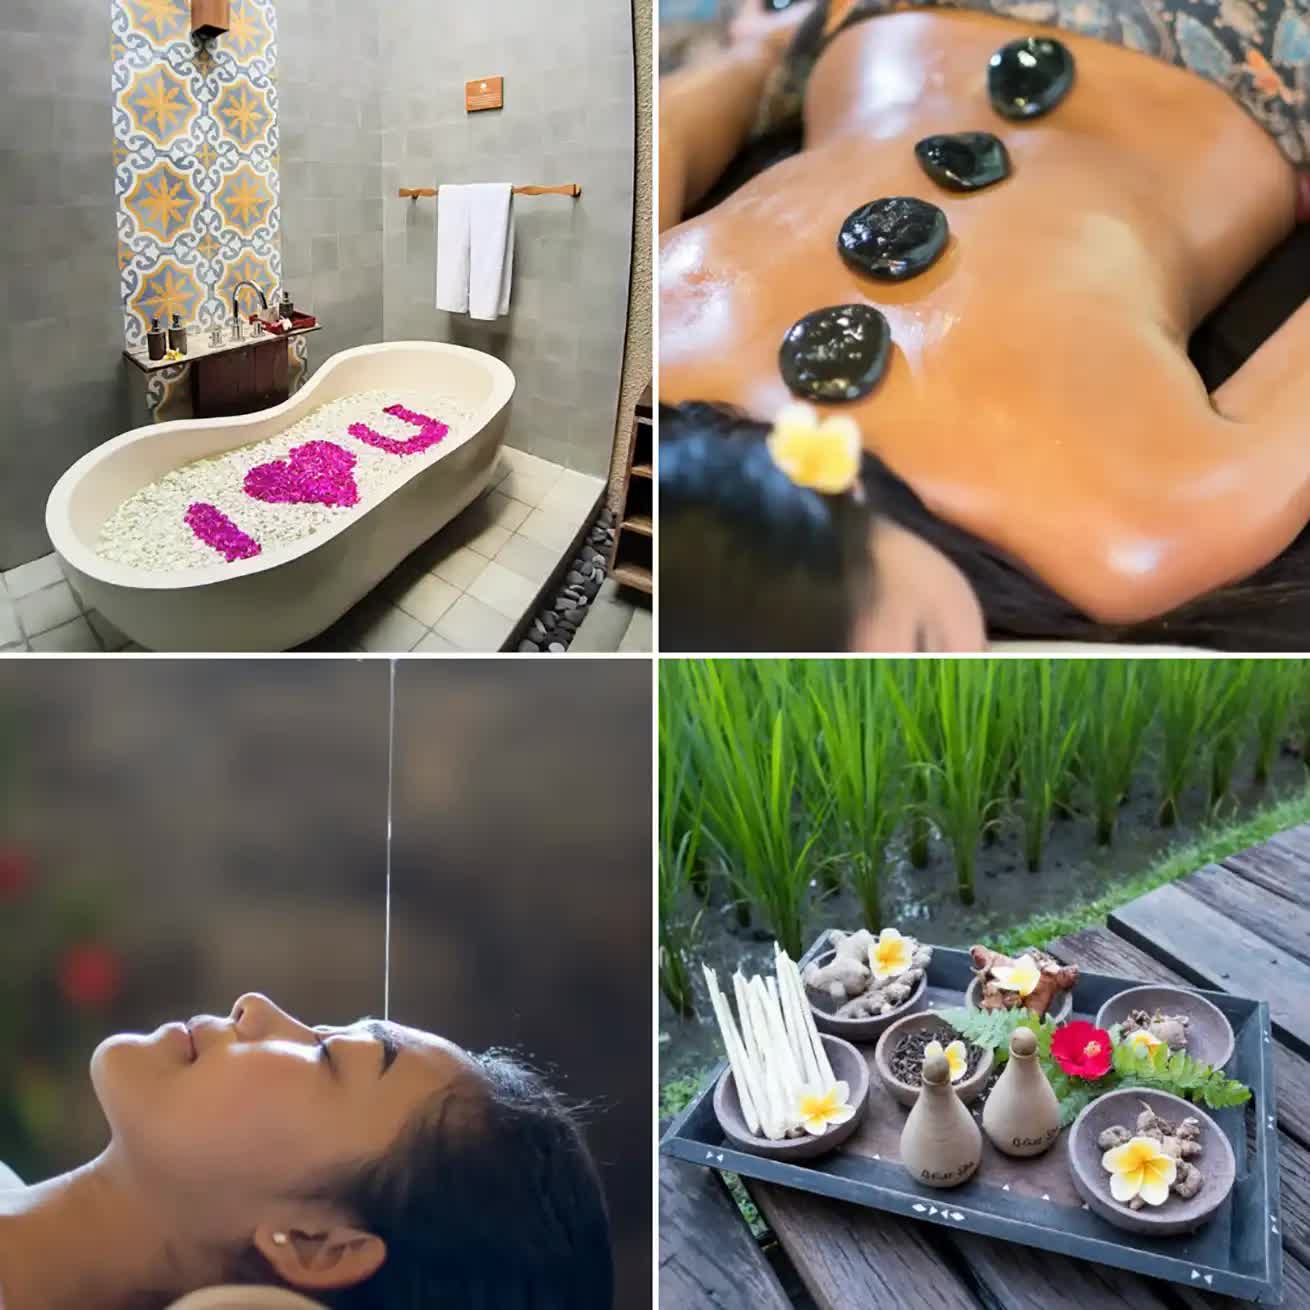 Bath, stones, aroma oils and other spa treatments at Bliss Ubud Spa